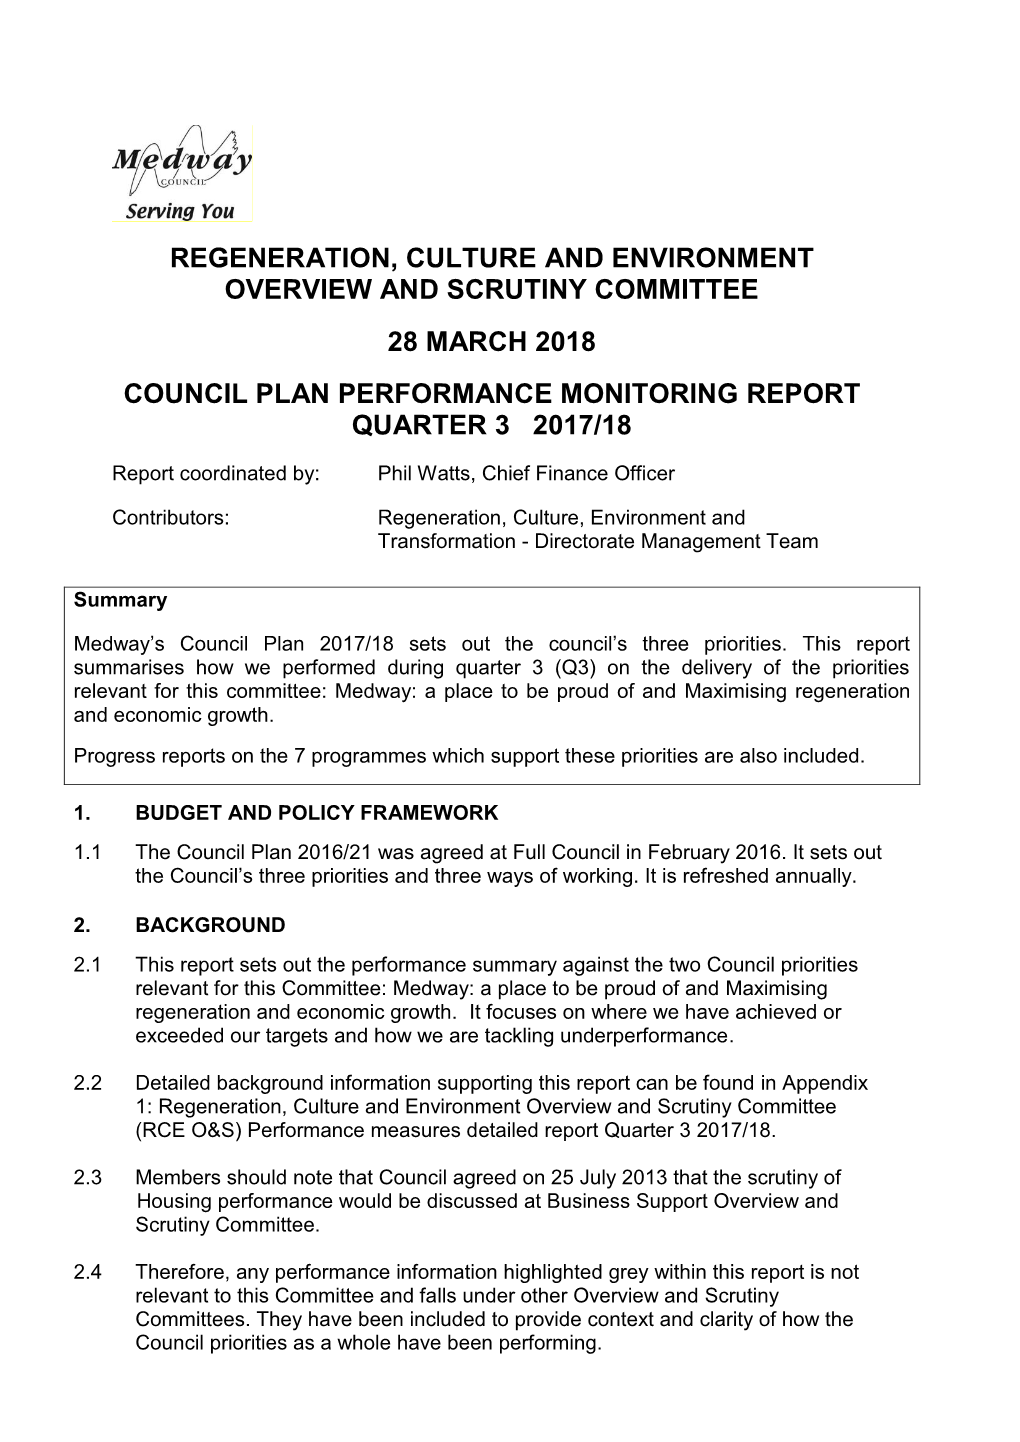 Regeneration, Culture and Environment Overview and Scrutiny Committee 28 March 2018 Council Plan Performance Monitoring Report Quarter 3 2017/18